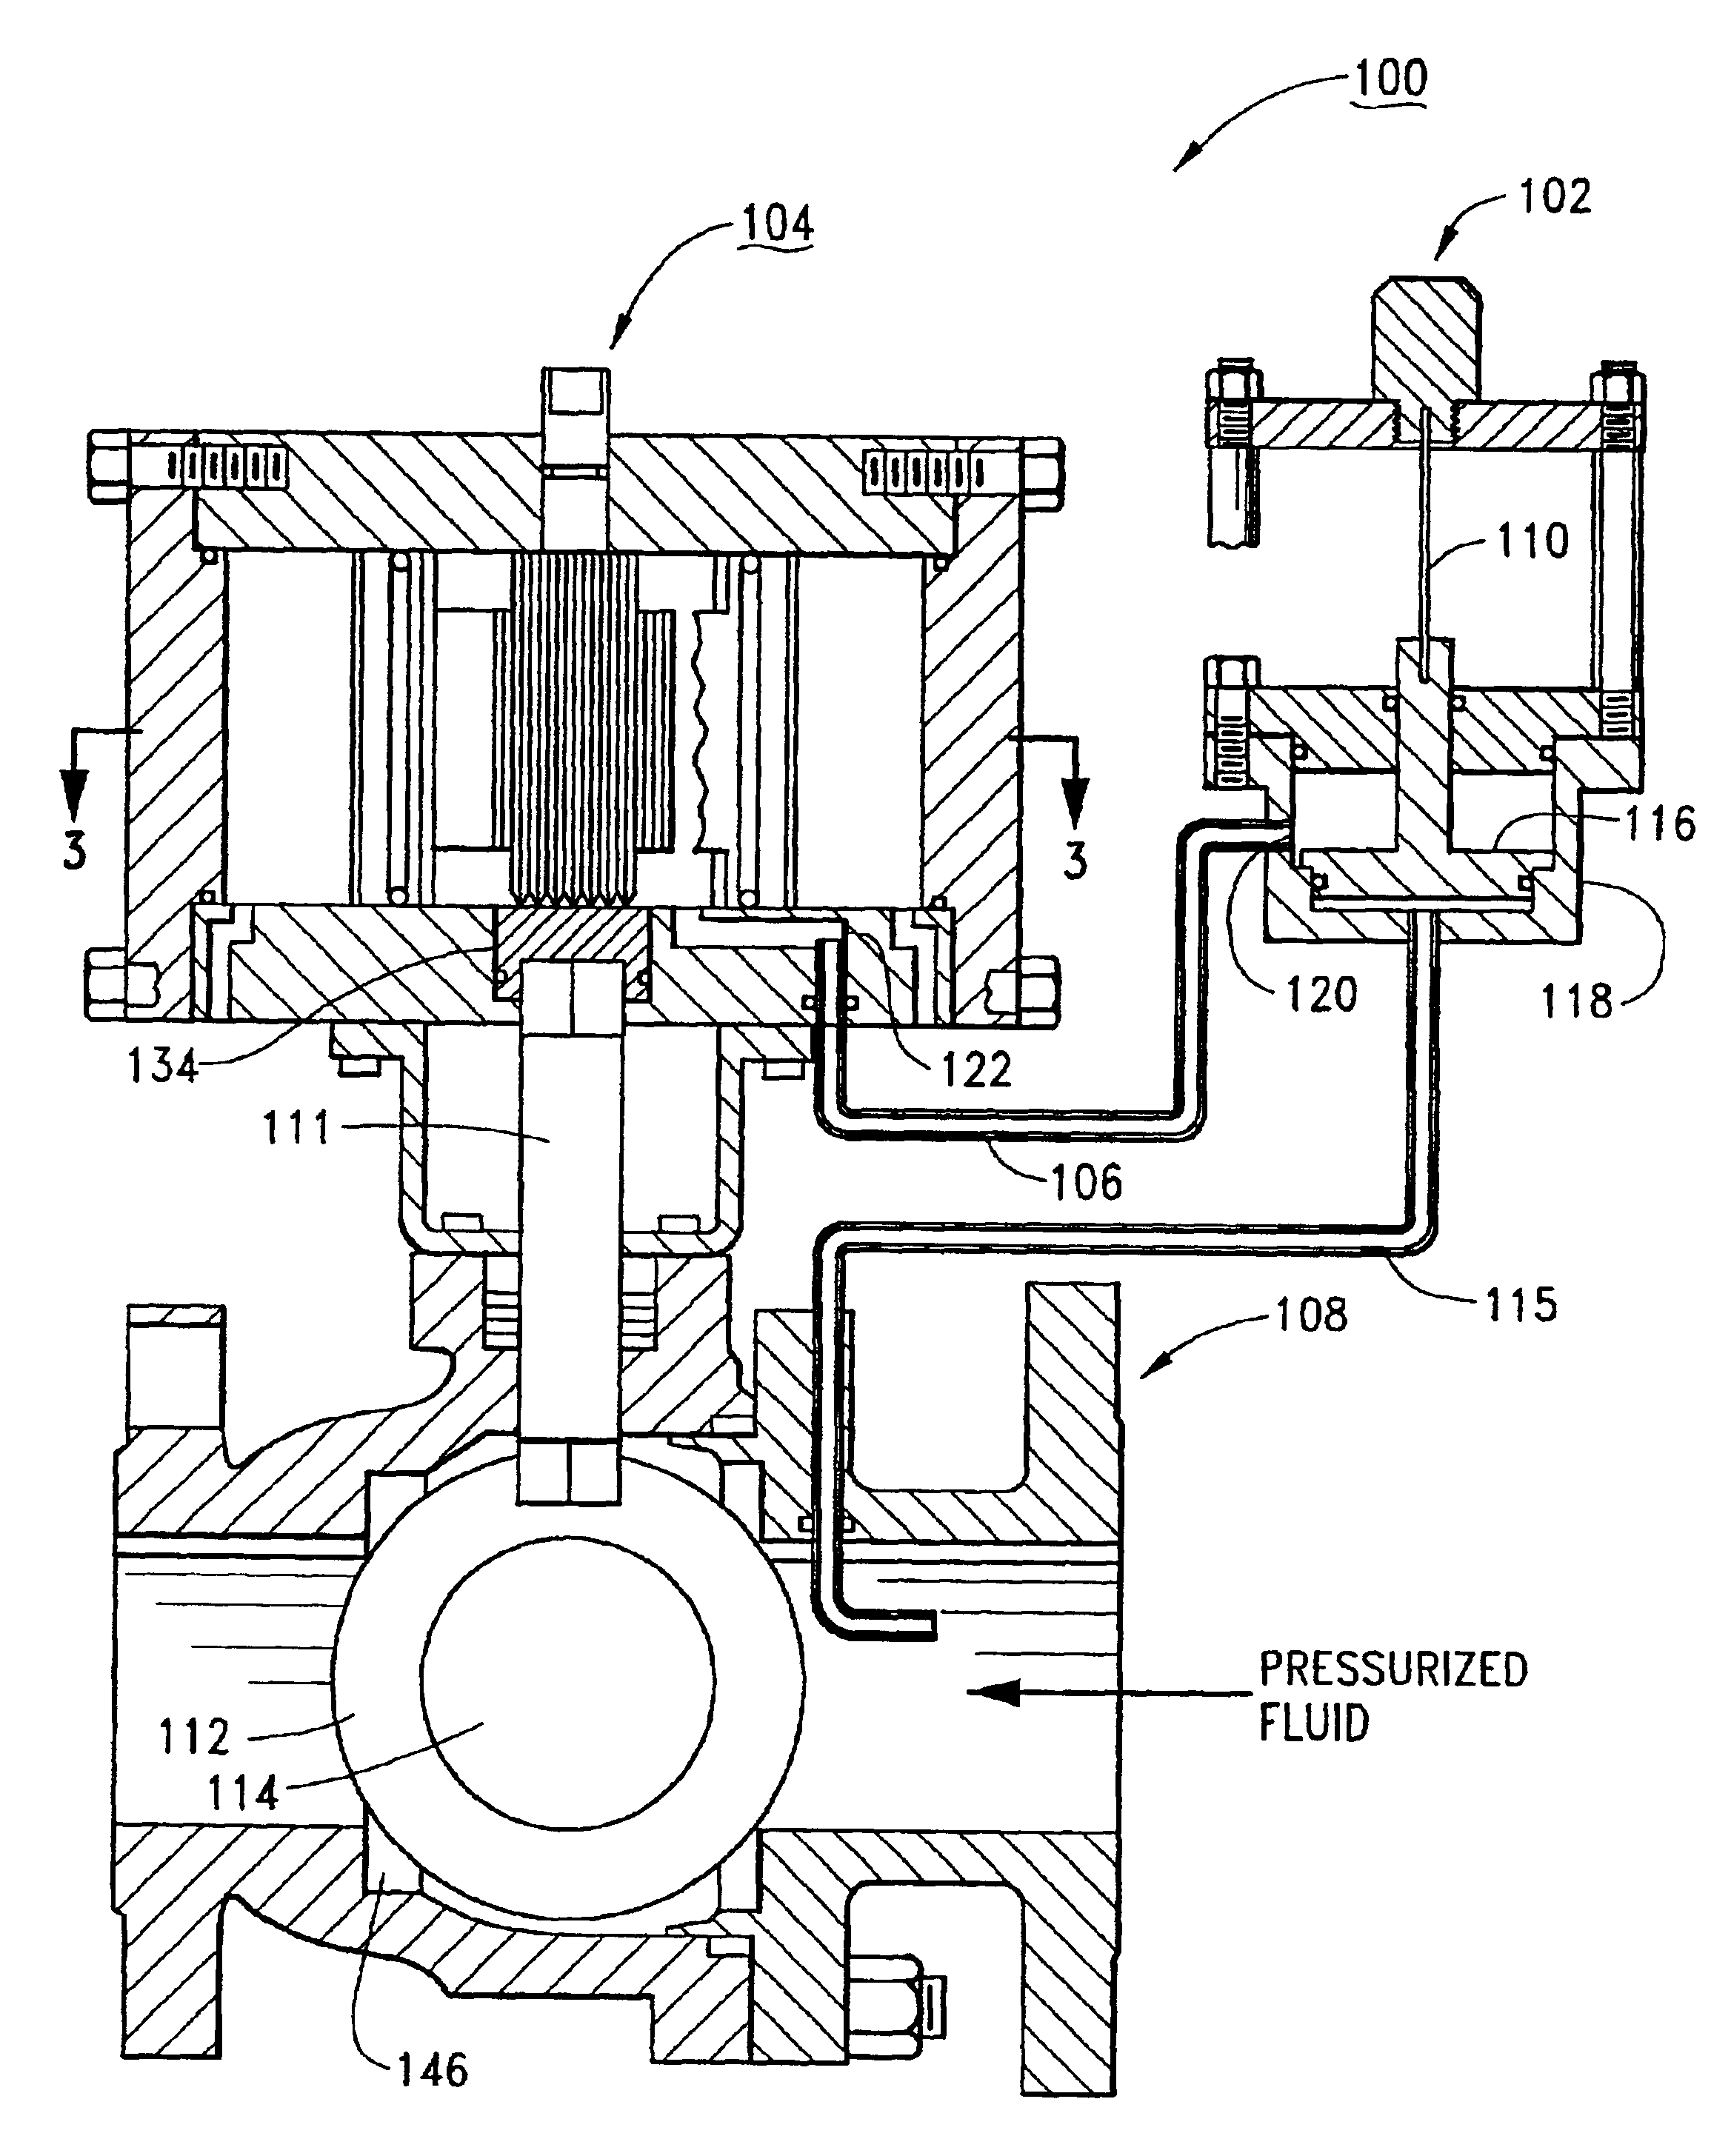 Pressure relief system with supply activated valve